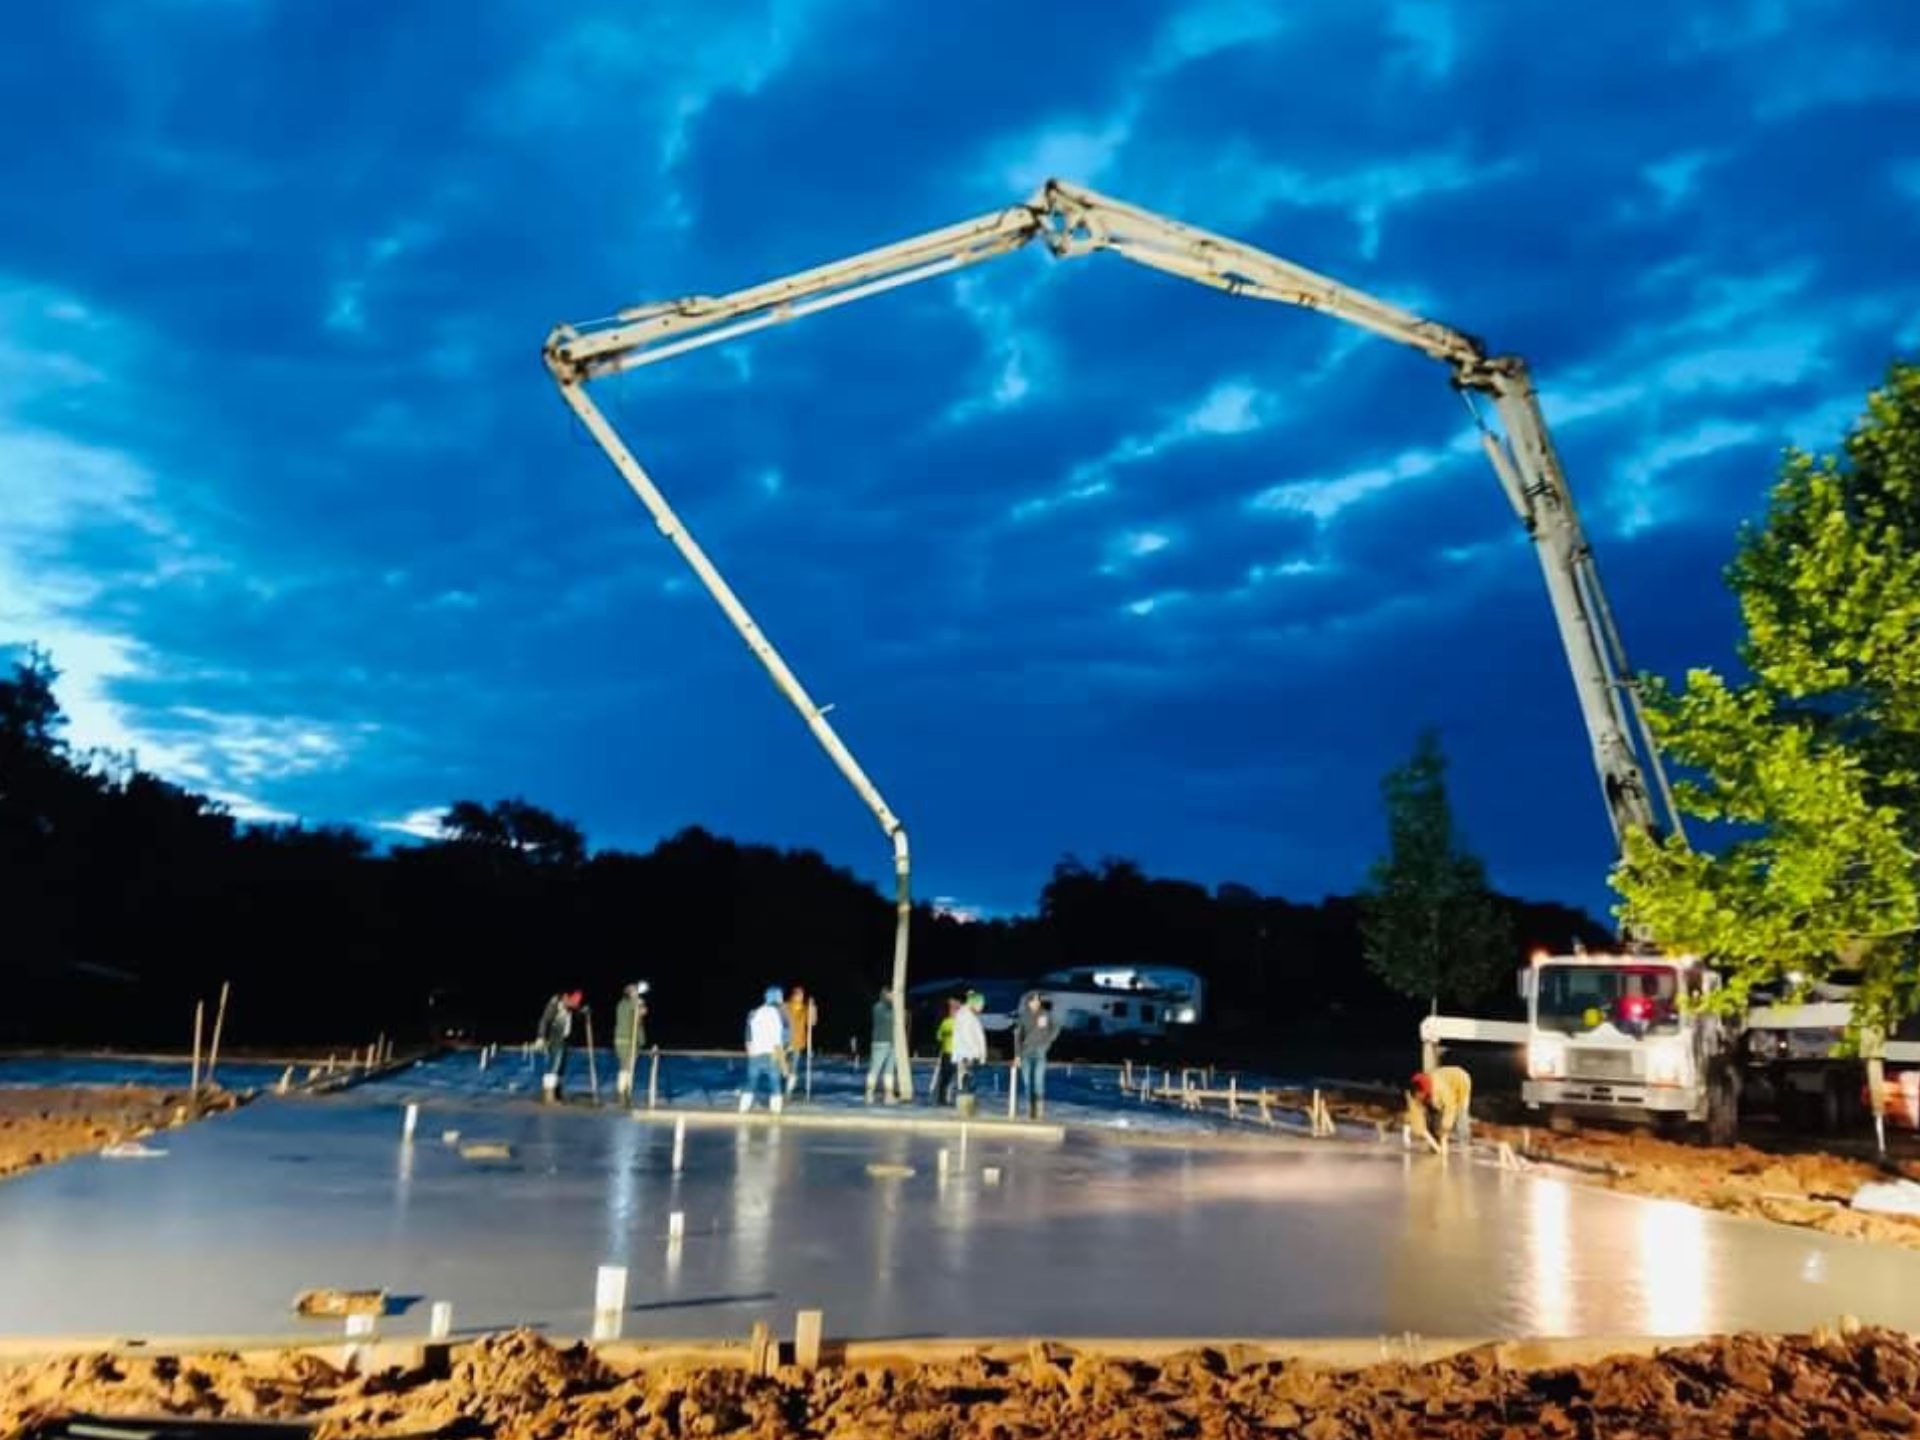 A man pouring concrete onto a concrete slab to create a solid foundation for construction.